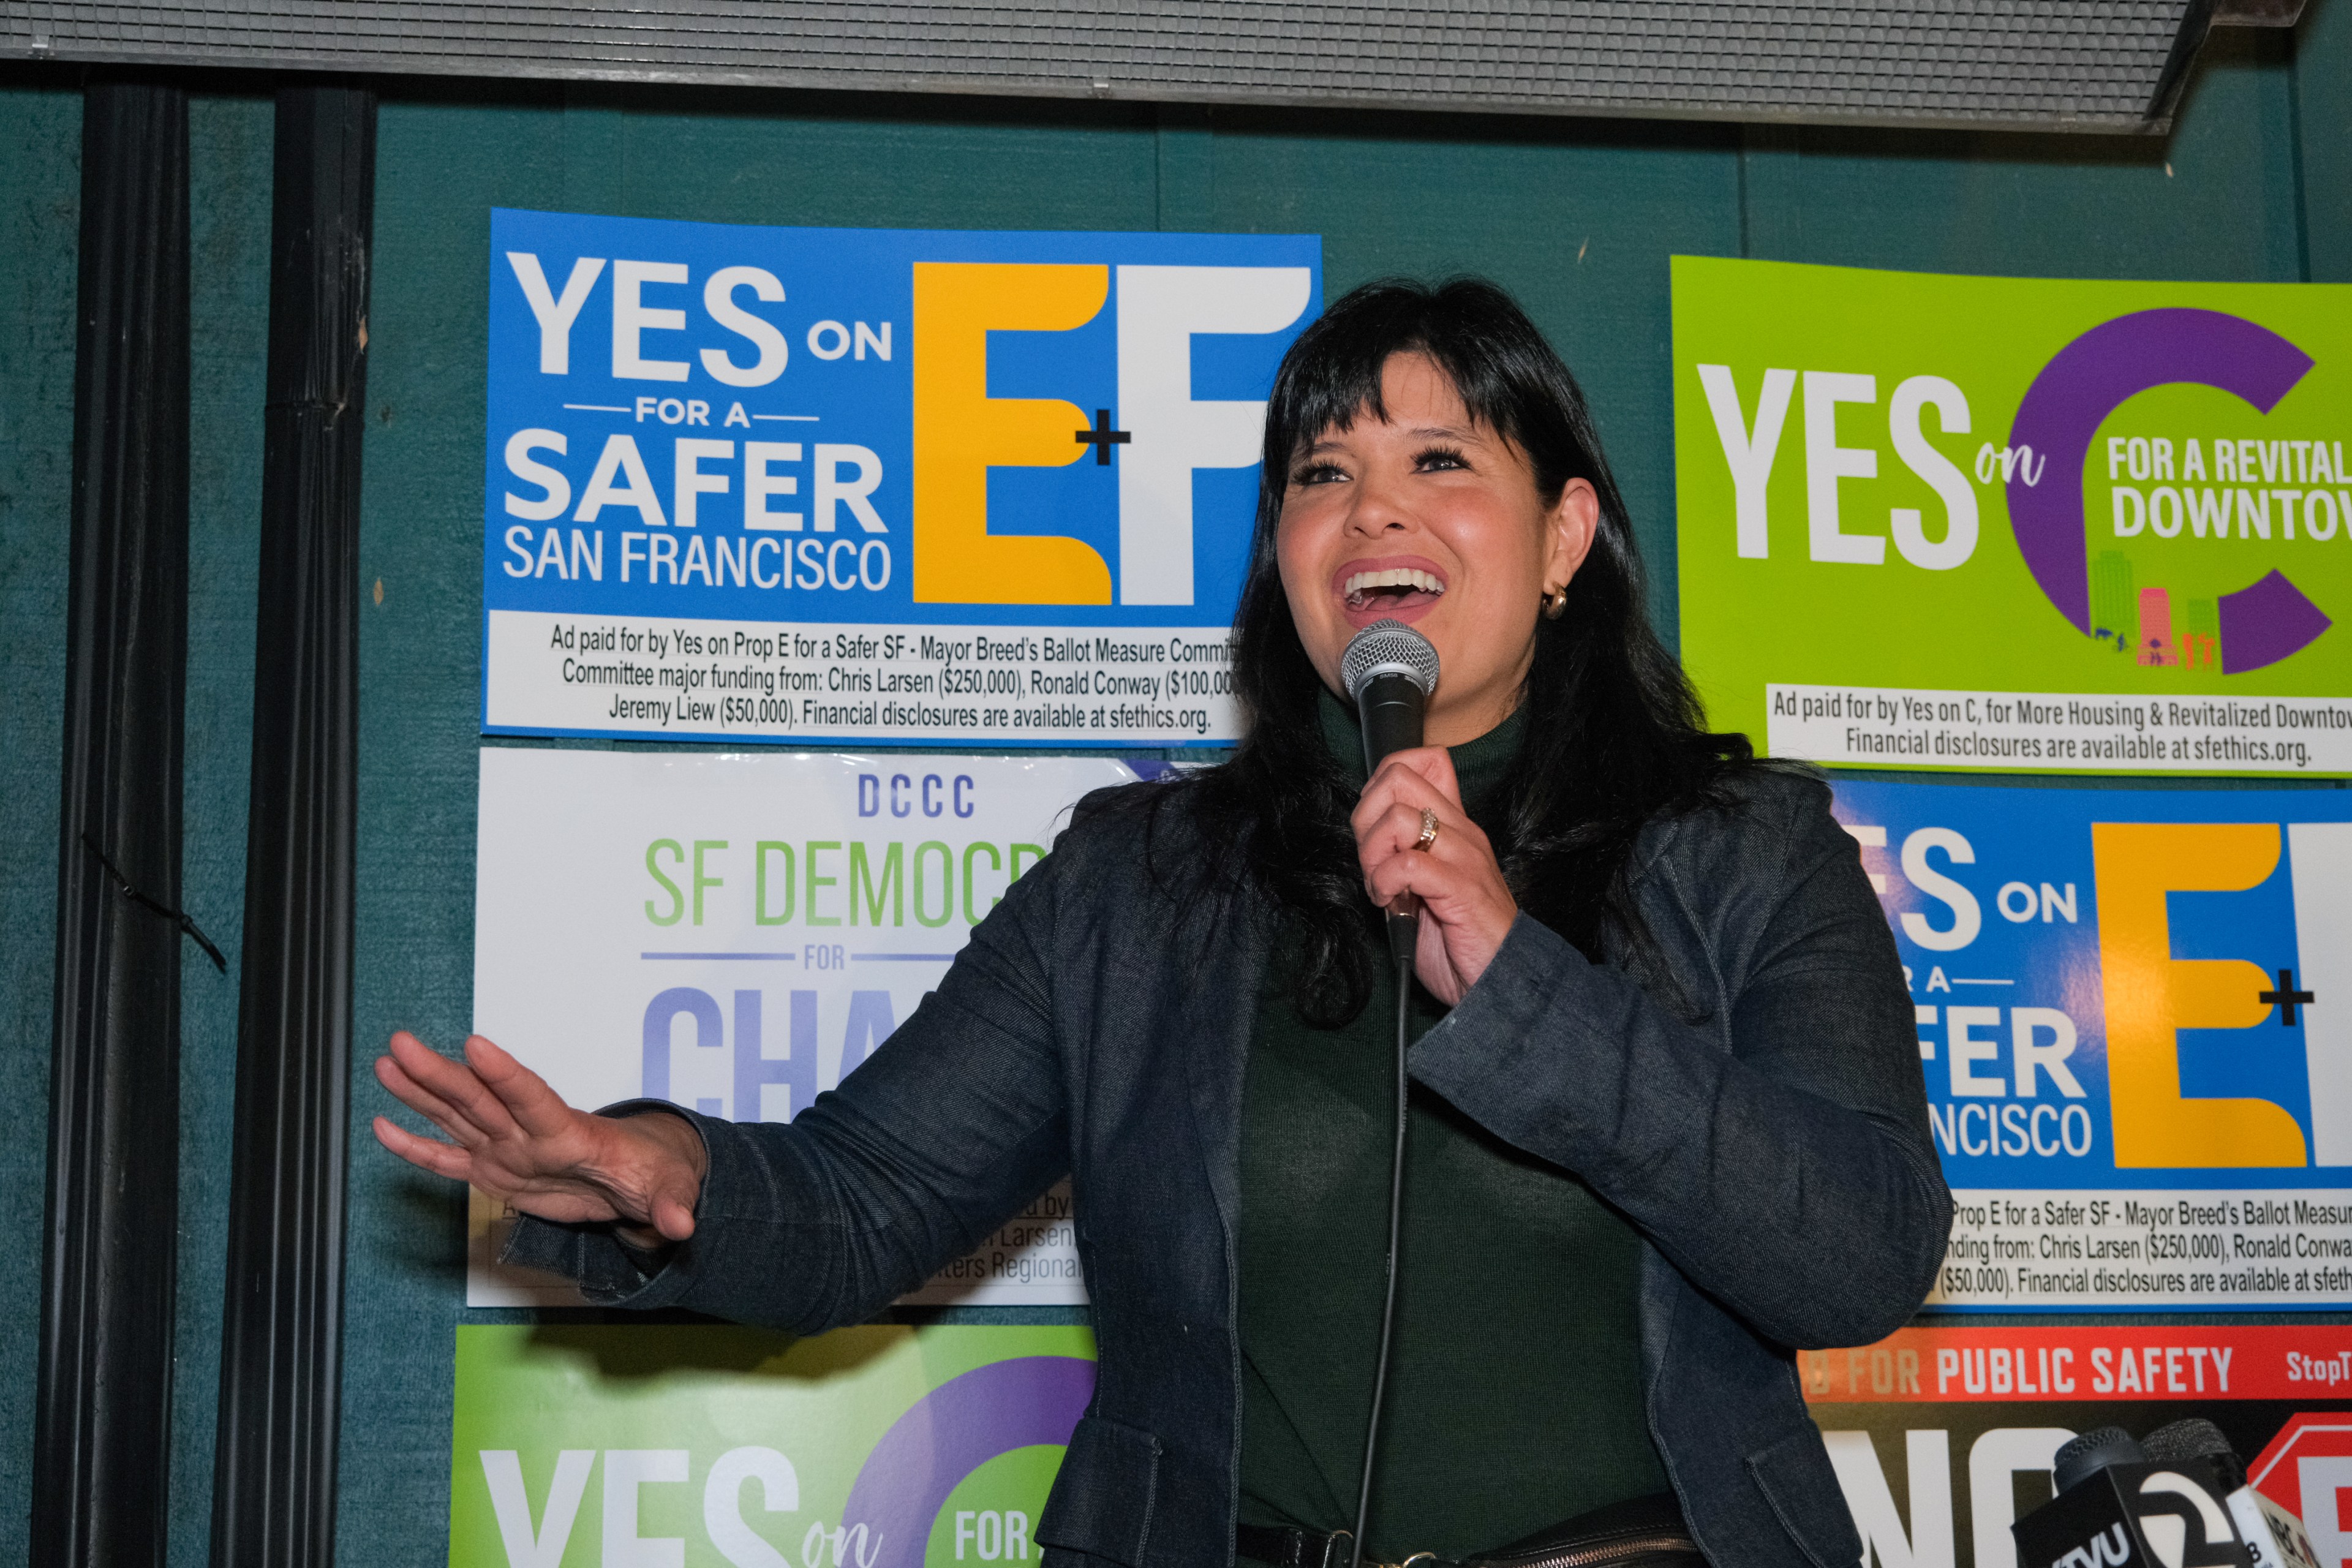 A woman is speaking into a microphone, smiling, with colorful political campaign posters in the background.